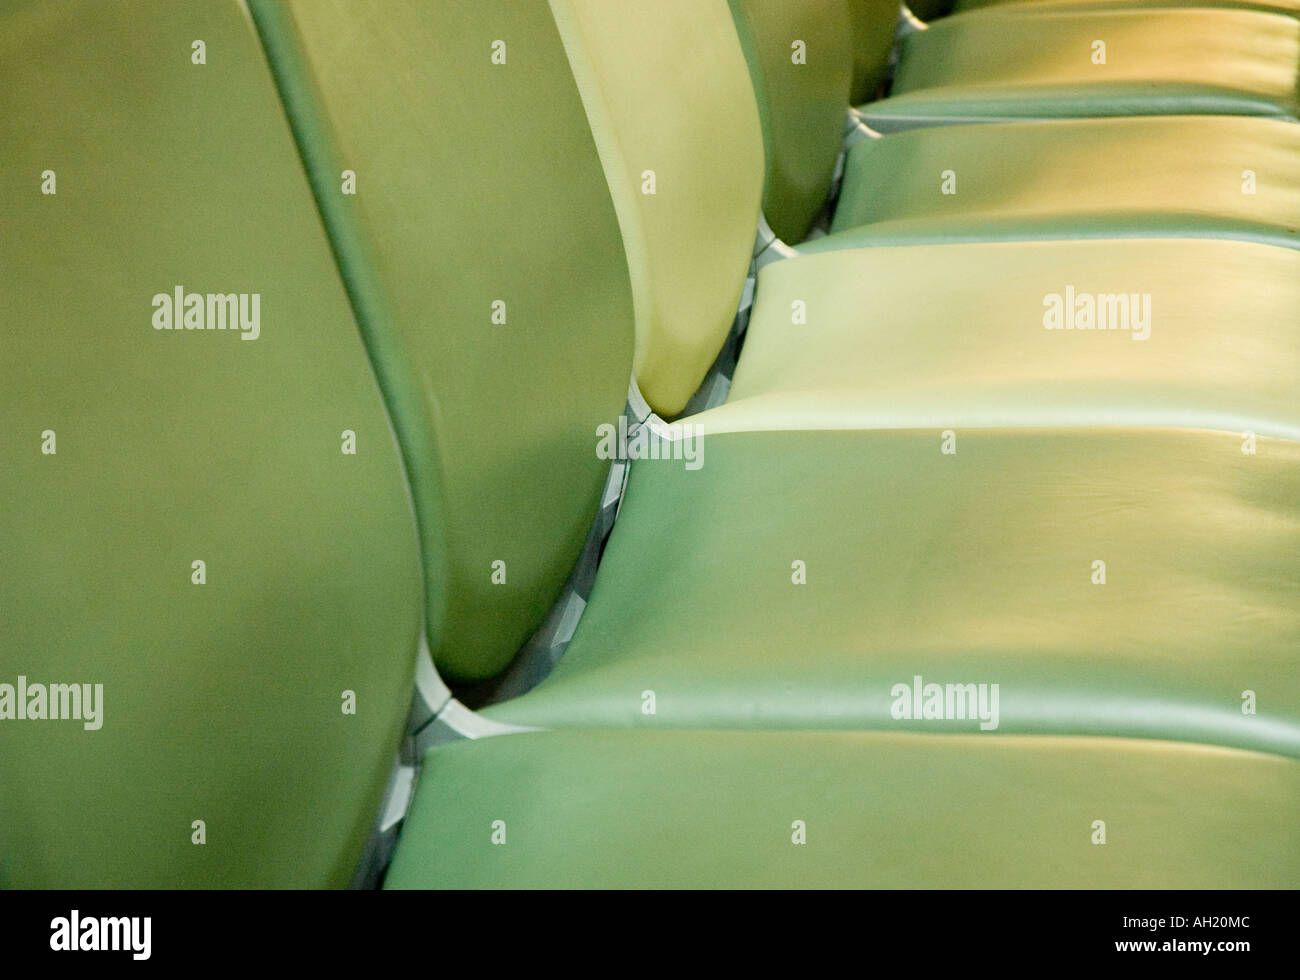 airport seating Stock Photo